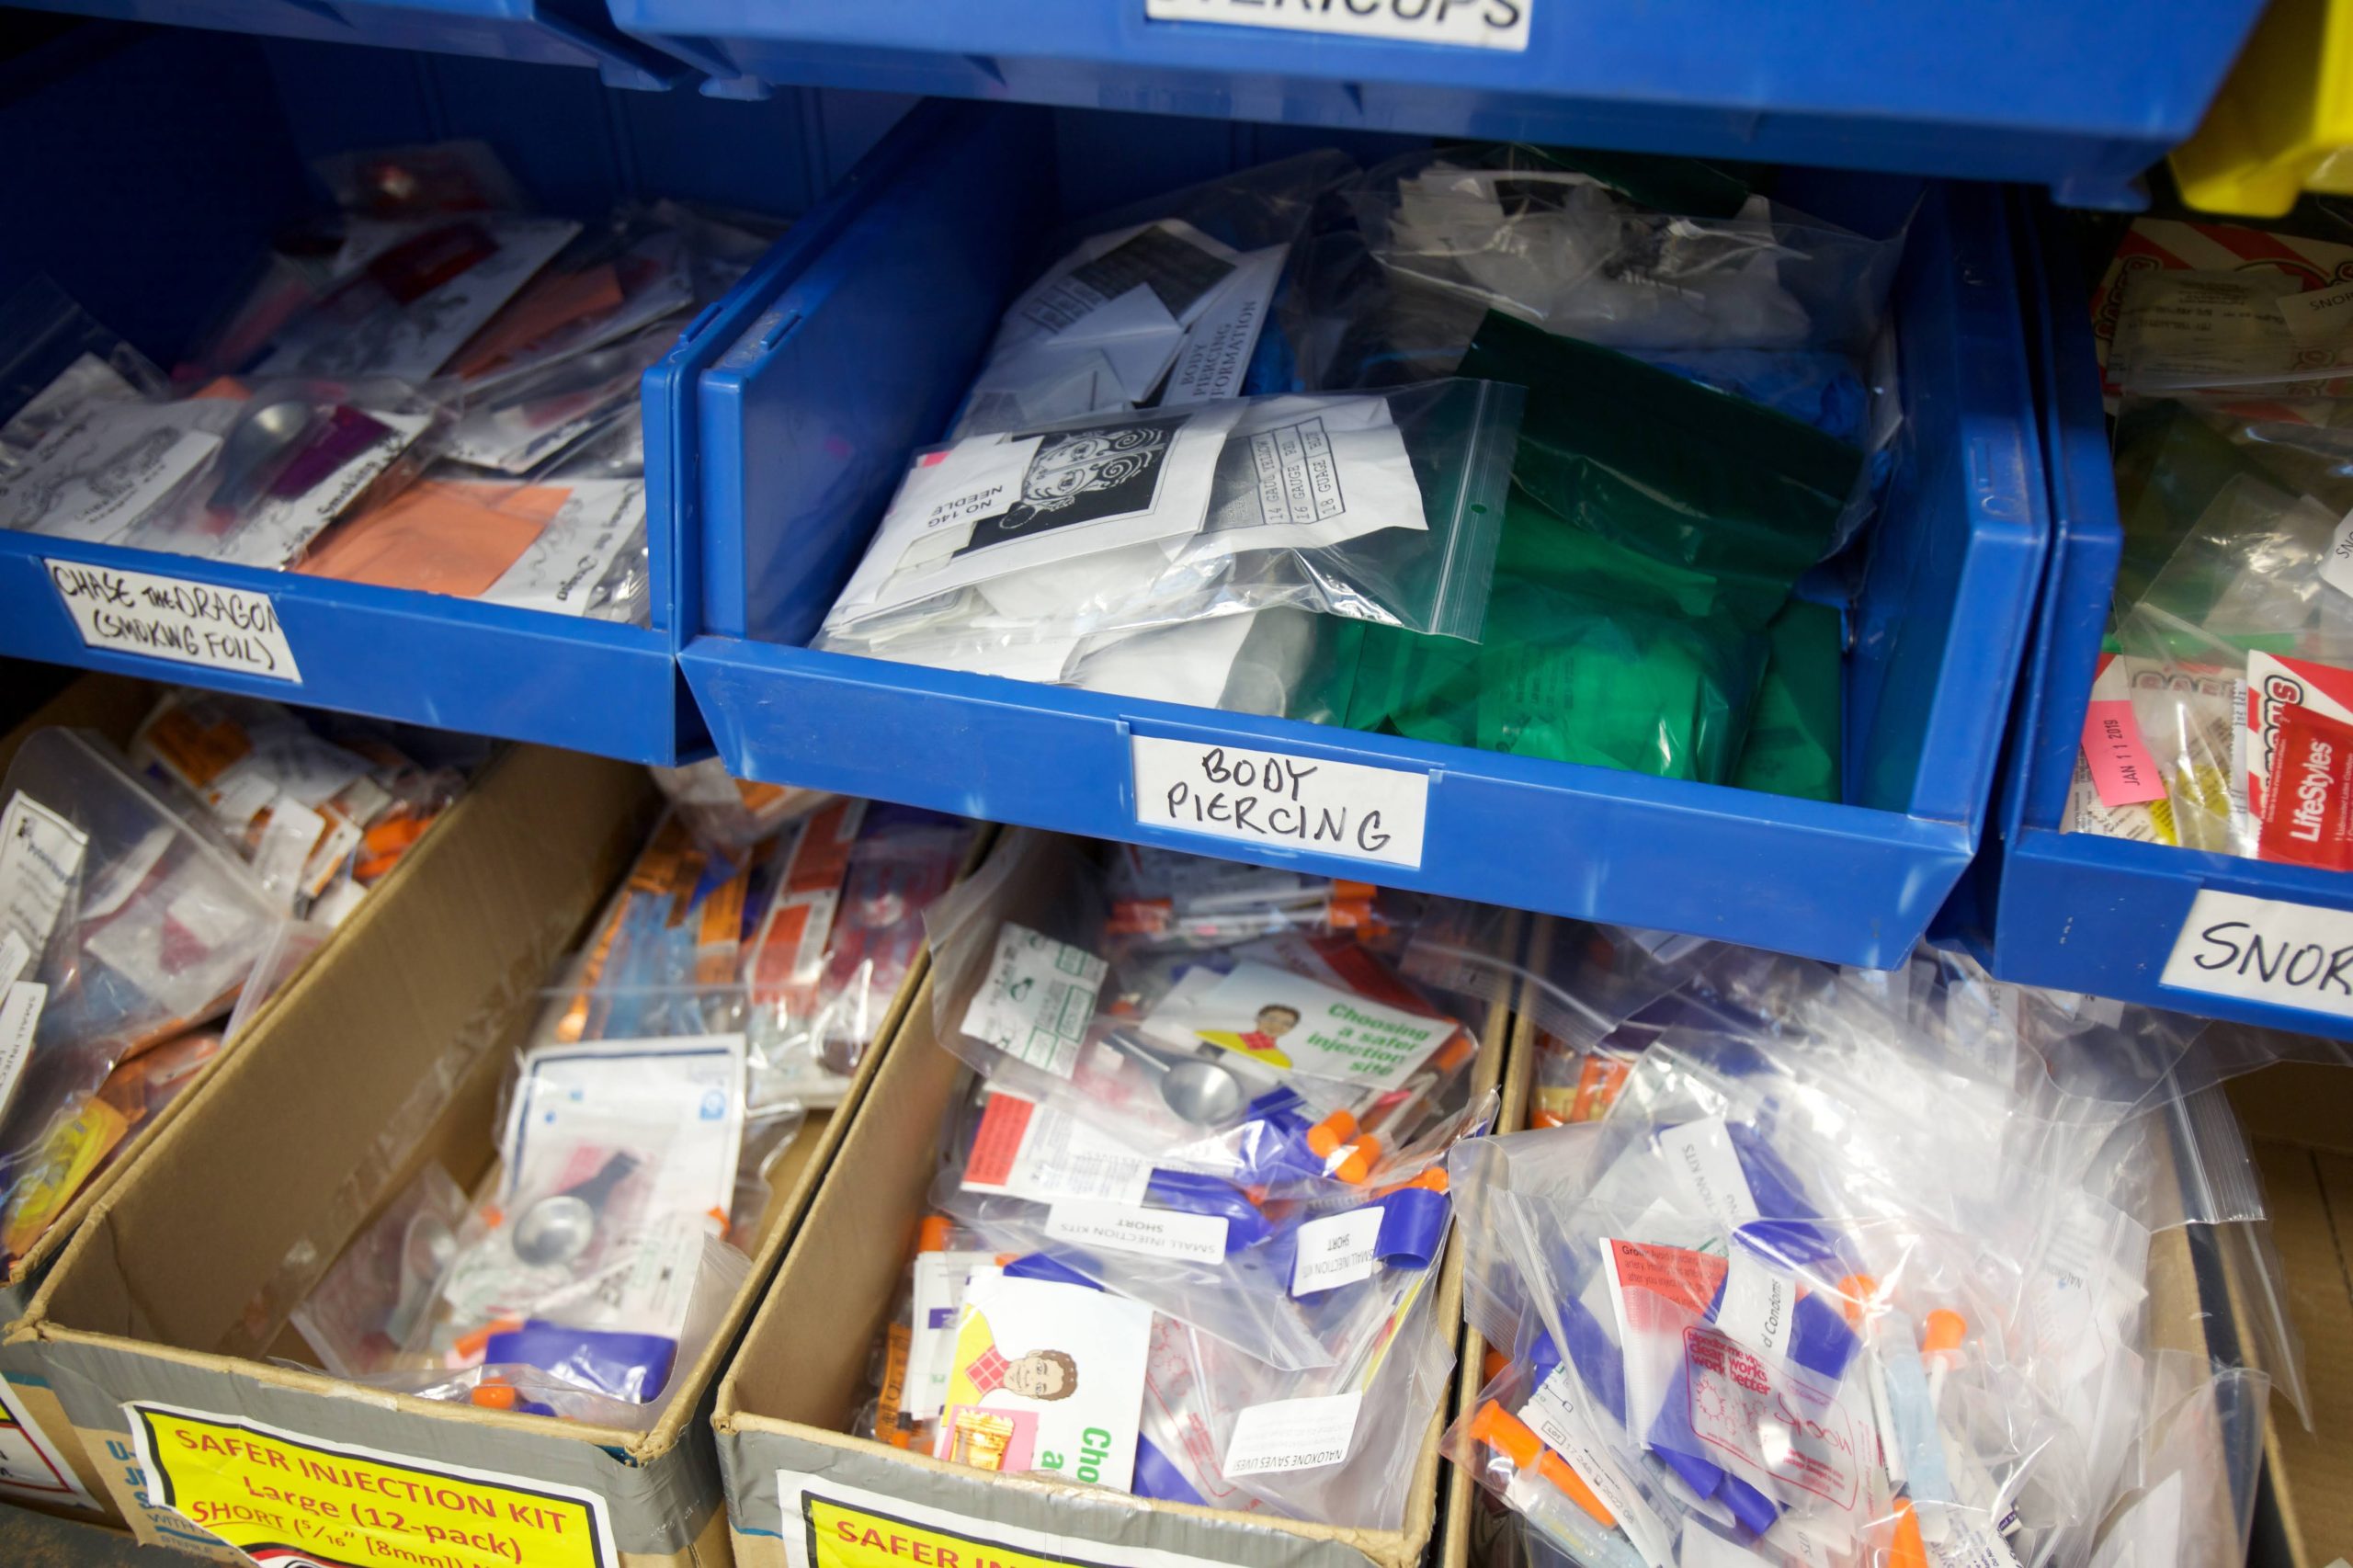 Containers of safe supplies, such as safer injection kits